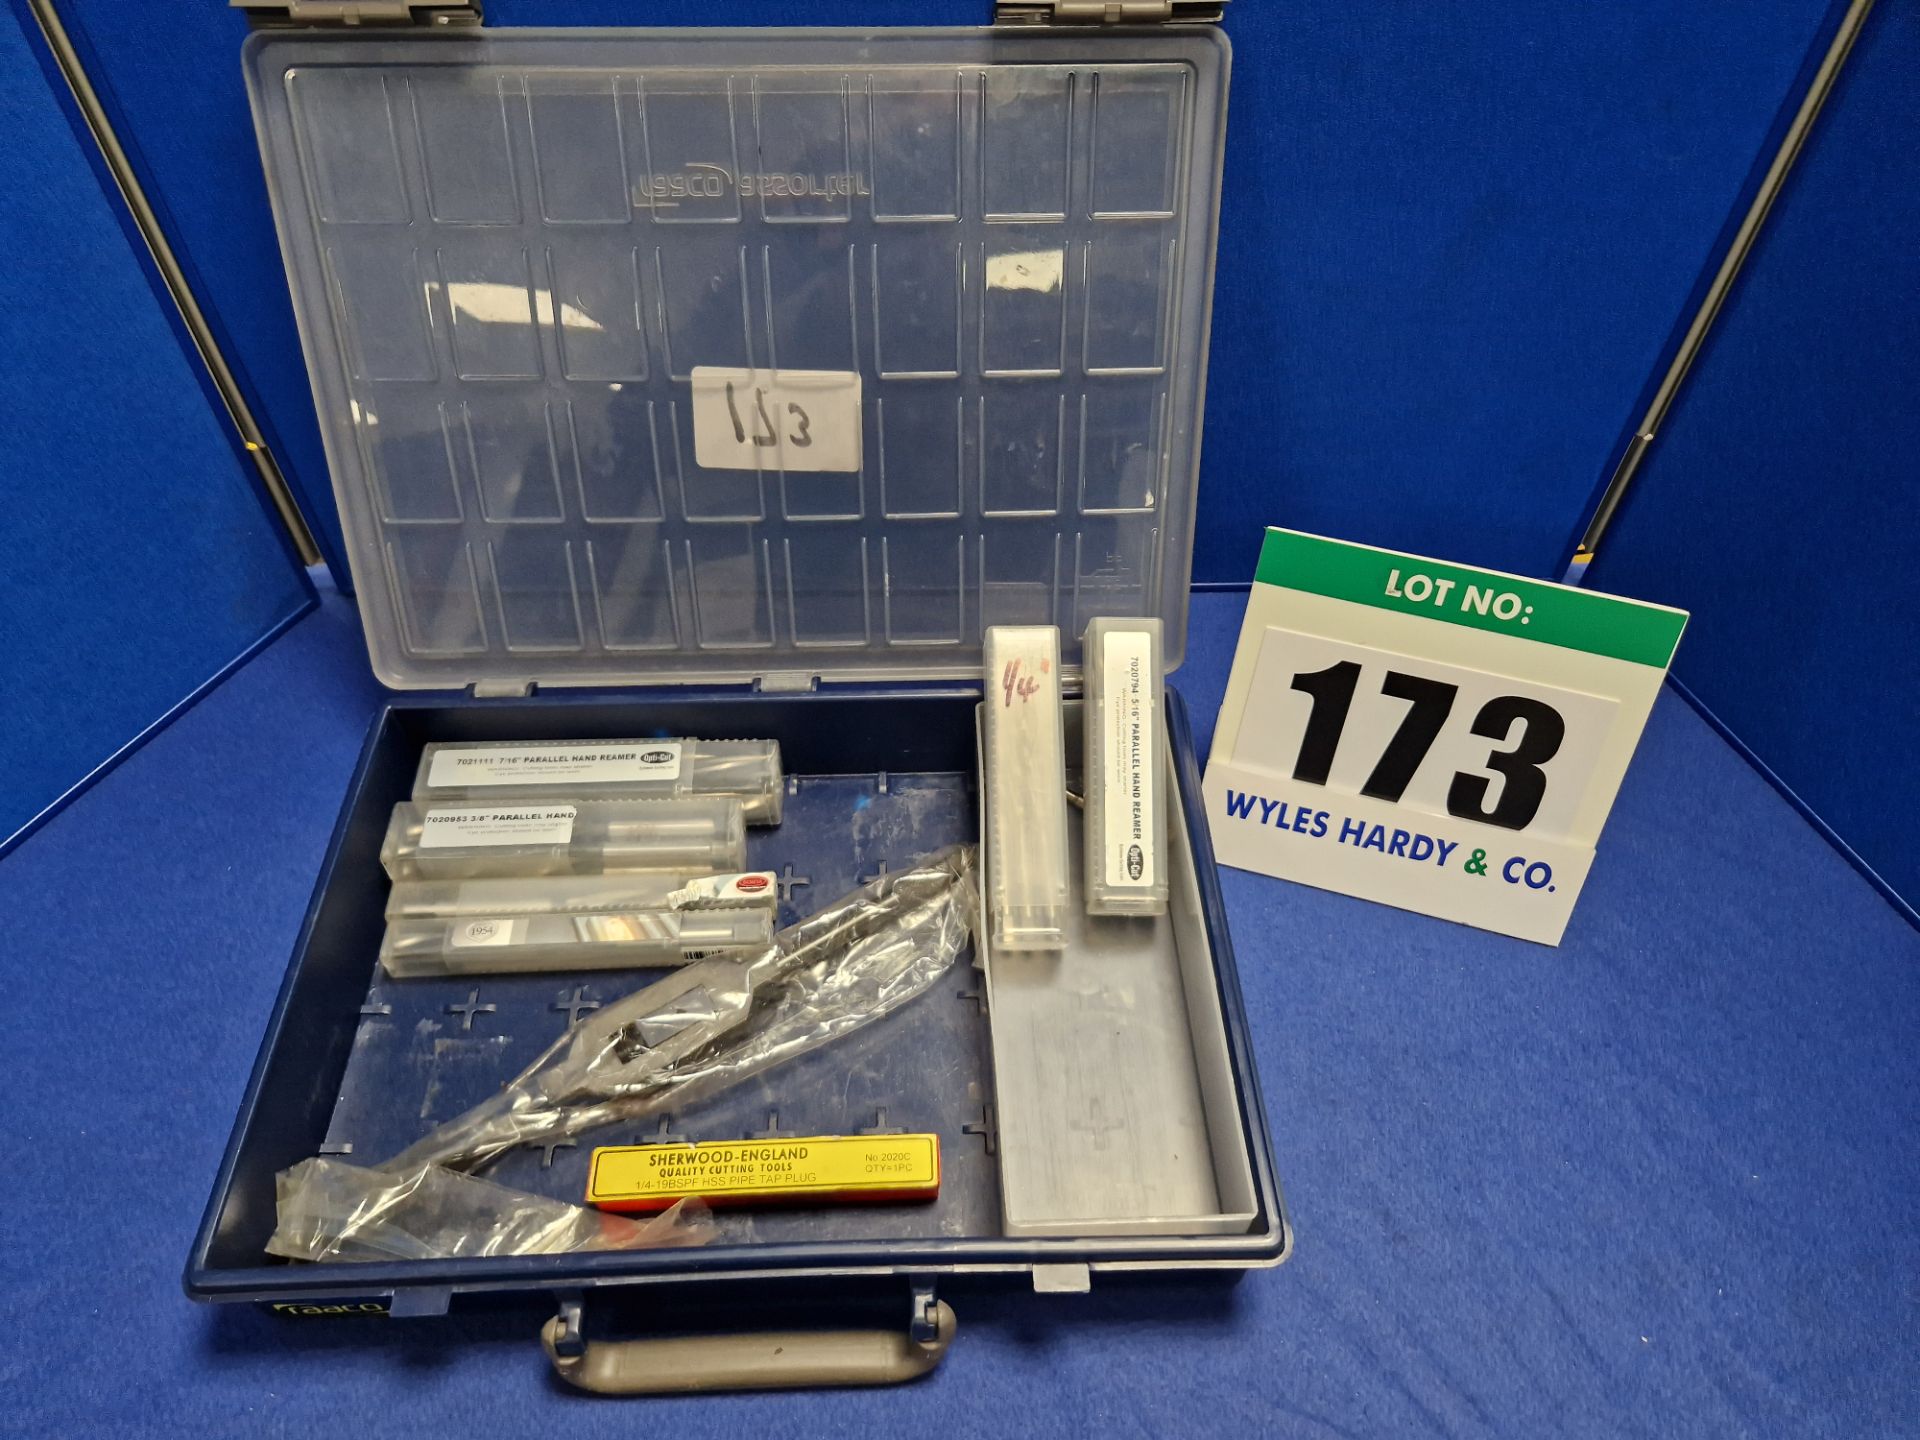 One Hand Reeming Set containing:- One Wrench with 5 x 7/16 inch Reems, 4 x 3/8 inch Reems, 3 x 5/